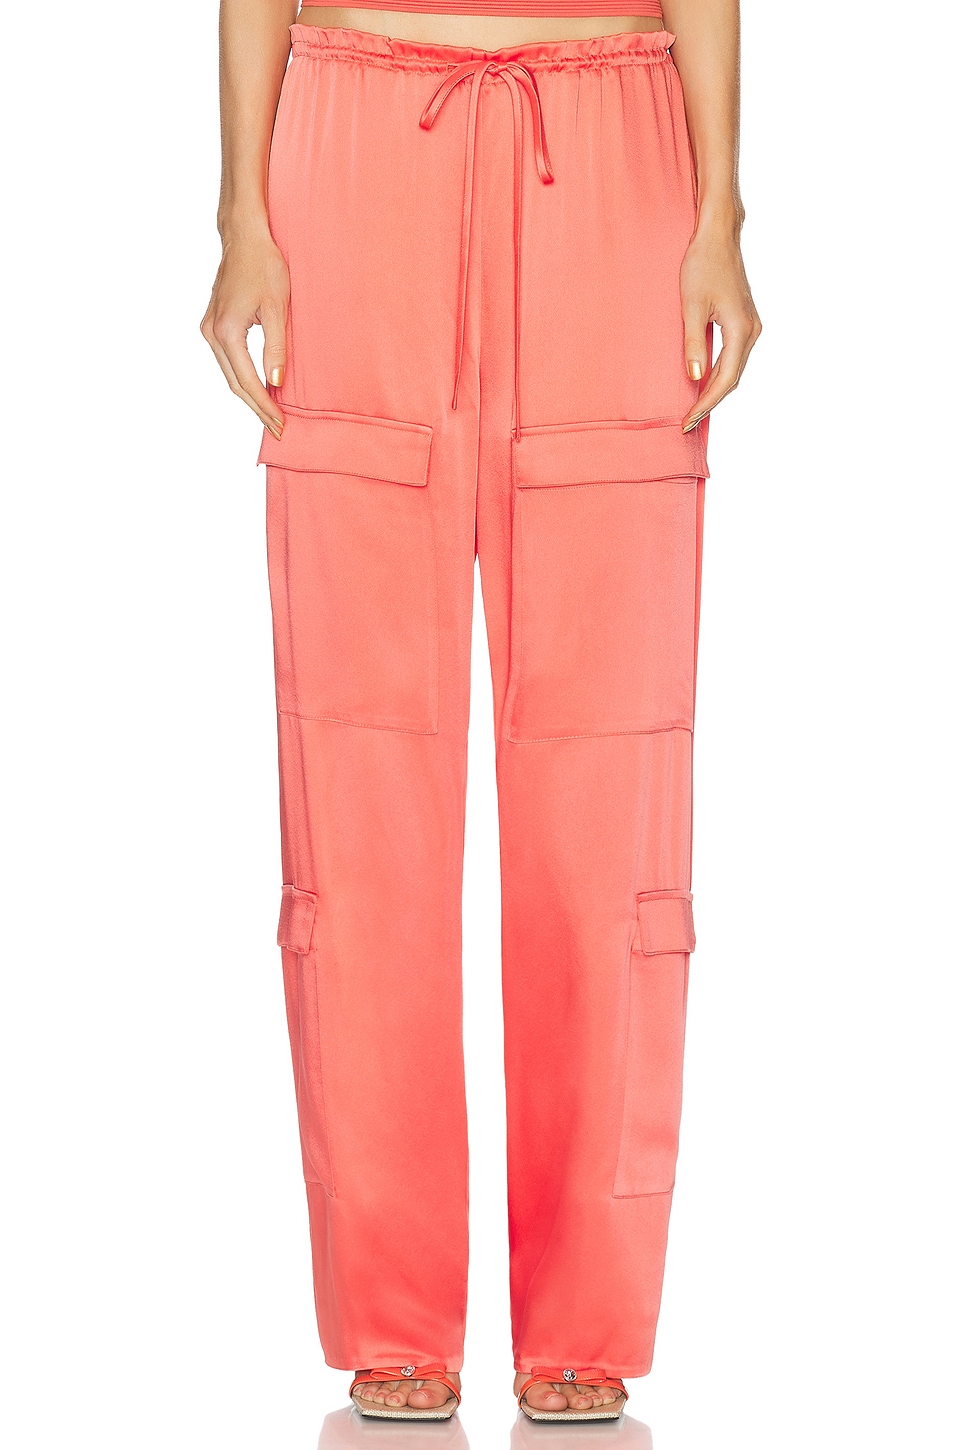 Doubleface Satin Drawstring Cargo Pant in Coral